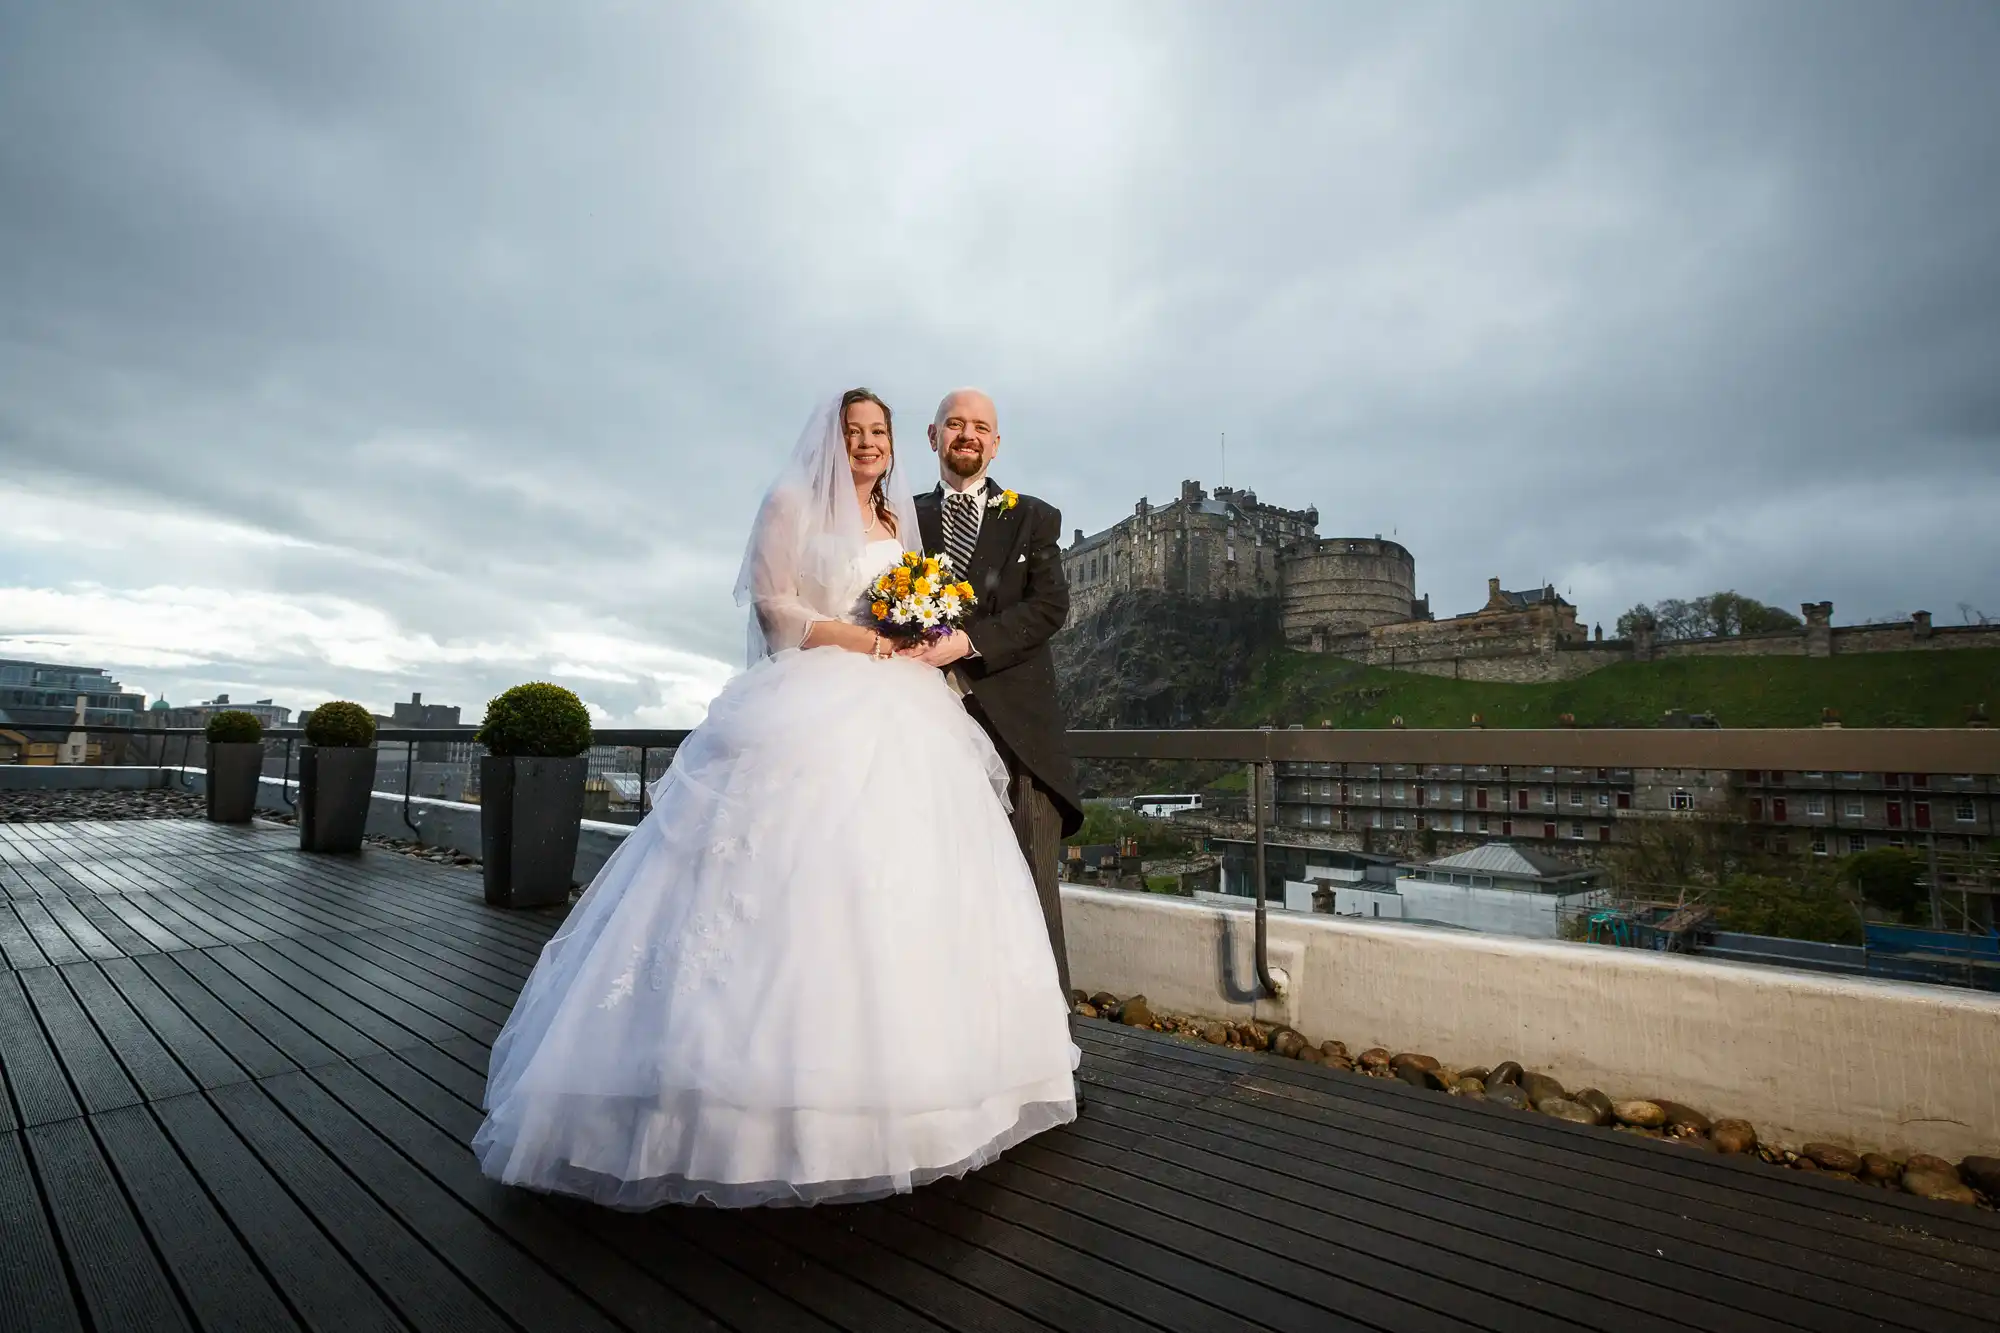 Bride and groom smiling on a rooftop, with a scenic view of edinburgh castle in the background, under a cloudy sky.